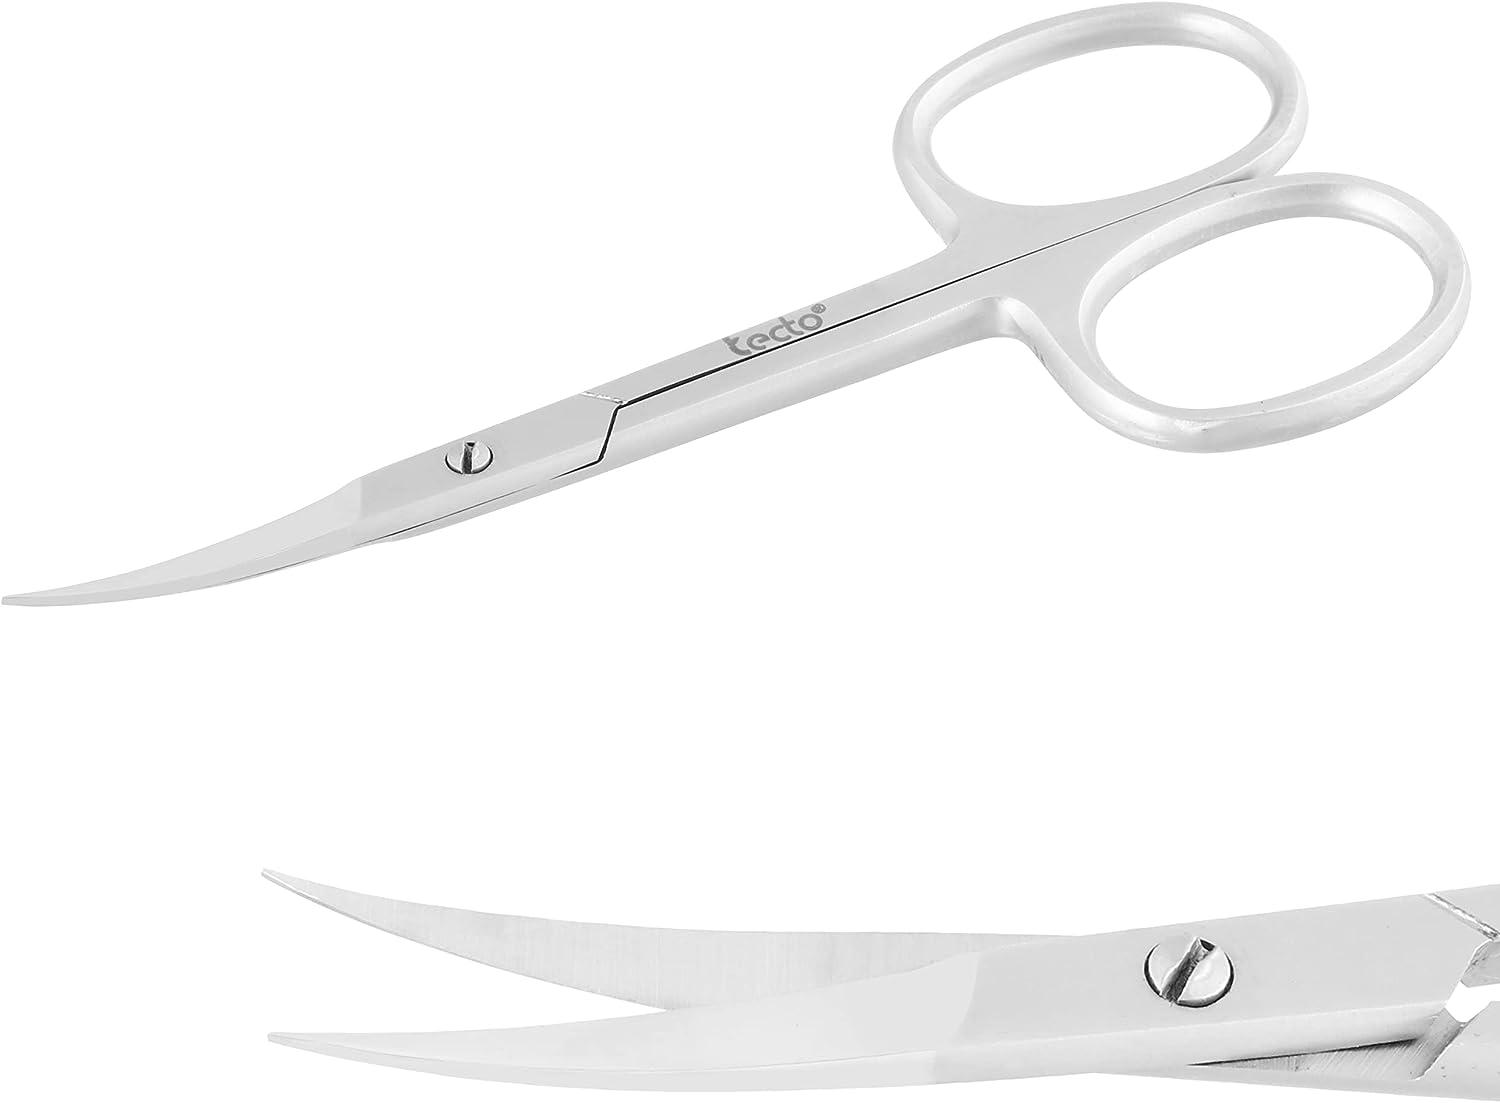 Professional Nail Scissors, Stainless Steel Manicure Scissors, Sharp  Cuticle Scissors, Multi-Purpose Curved Small Scissors Beauty for Manicure,  Eyelashes, Eyebrow, Toenail for Women and Men, Price $12. For USA.  Interested DM me for